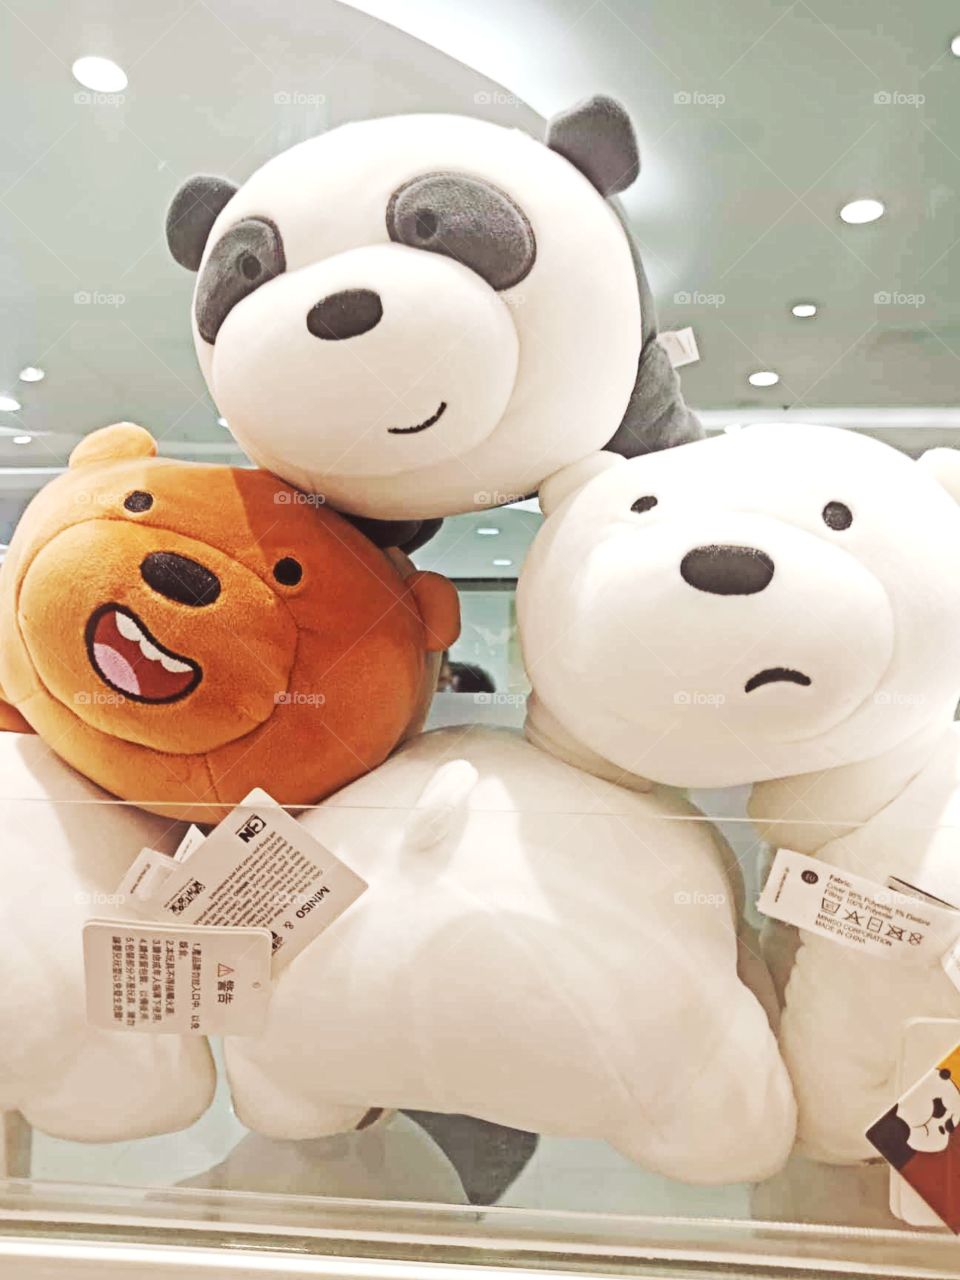 The 'We Bare Bears' well-known main characters' stuff toys in mall sale.